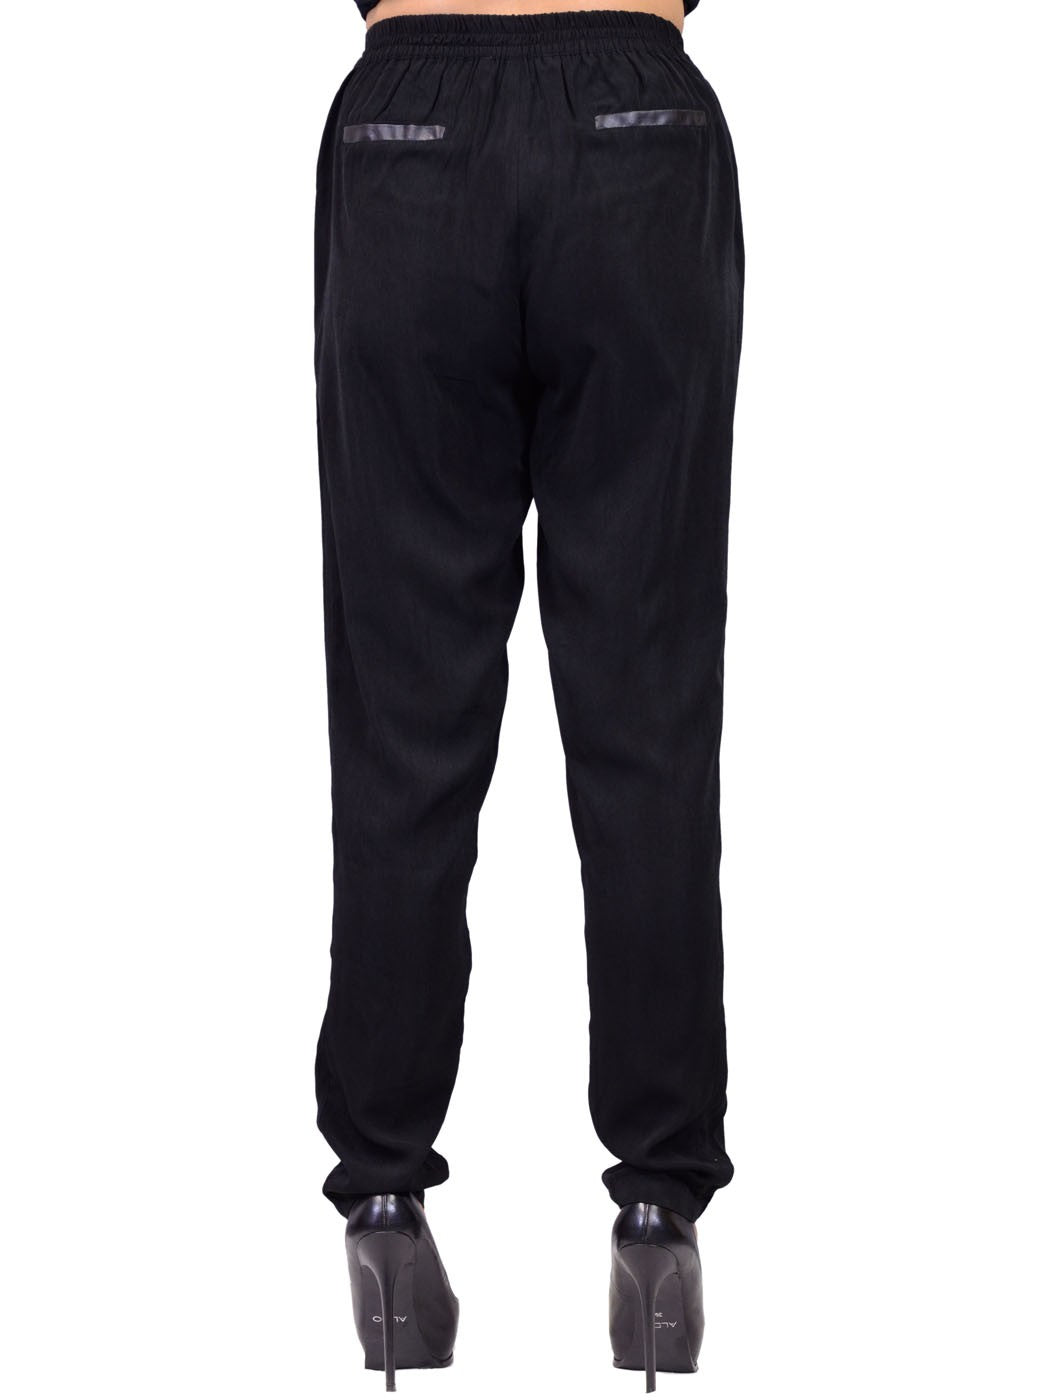 Anna-Kaci Tapered Harem Pants With Front Zipper And Two Front Pocket Trim - ALILANG.COM